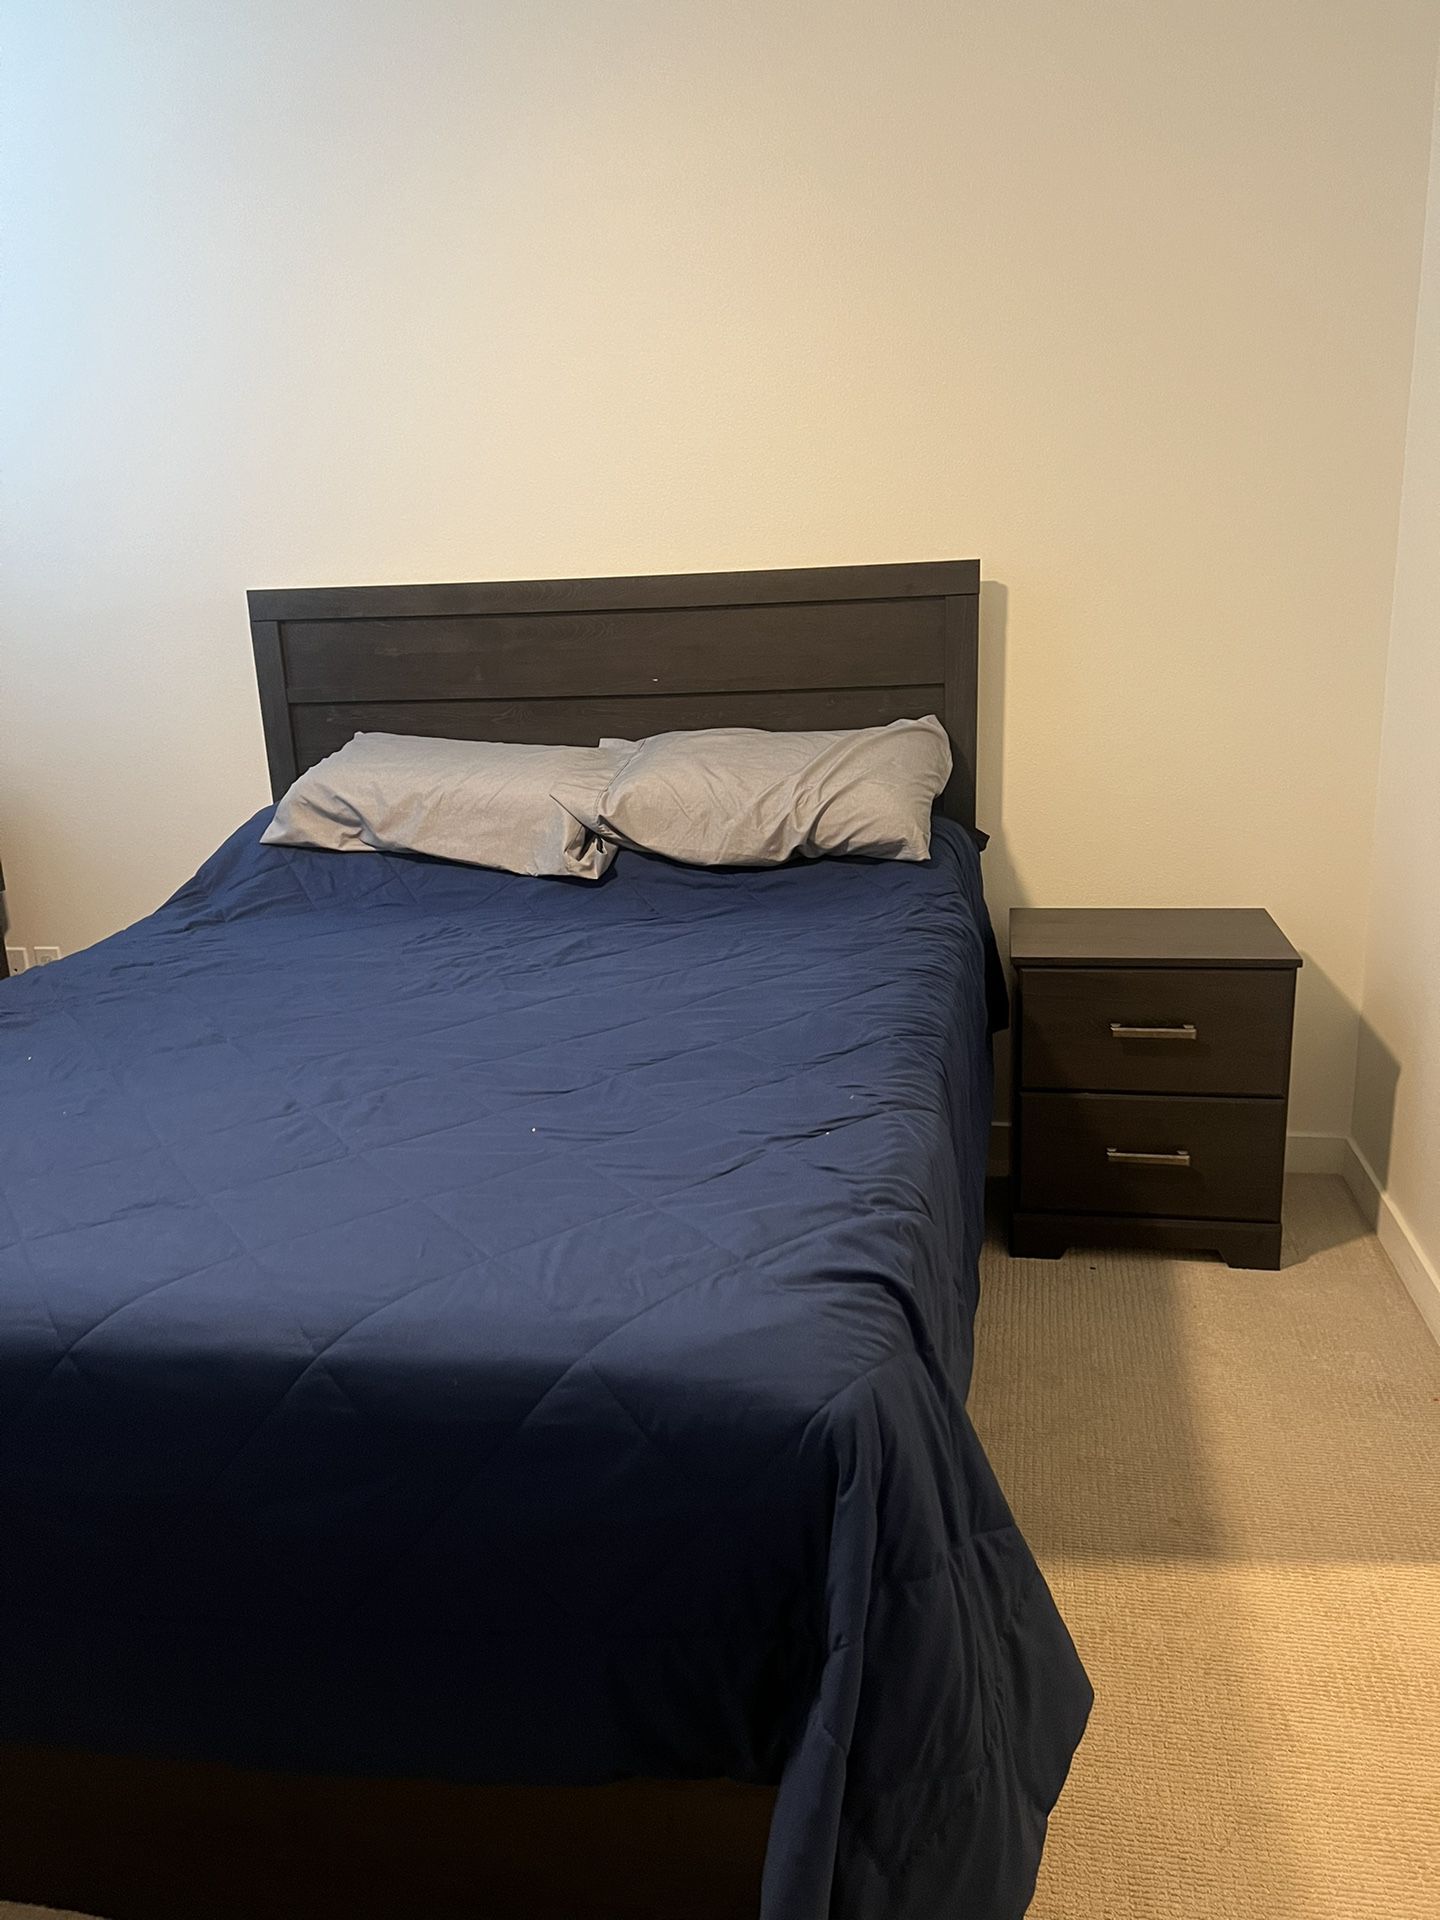 Queen Bed Frame And Nightstand